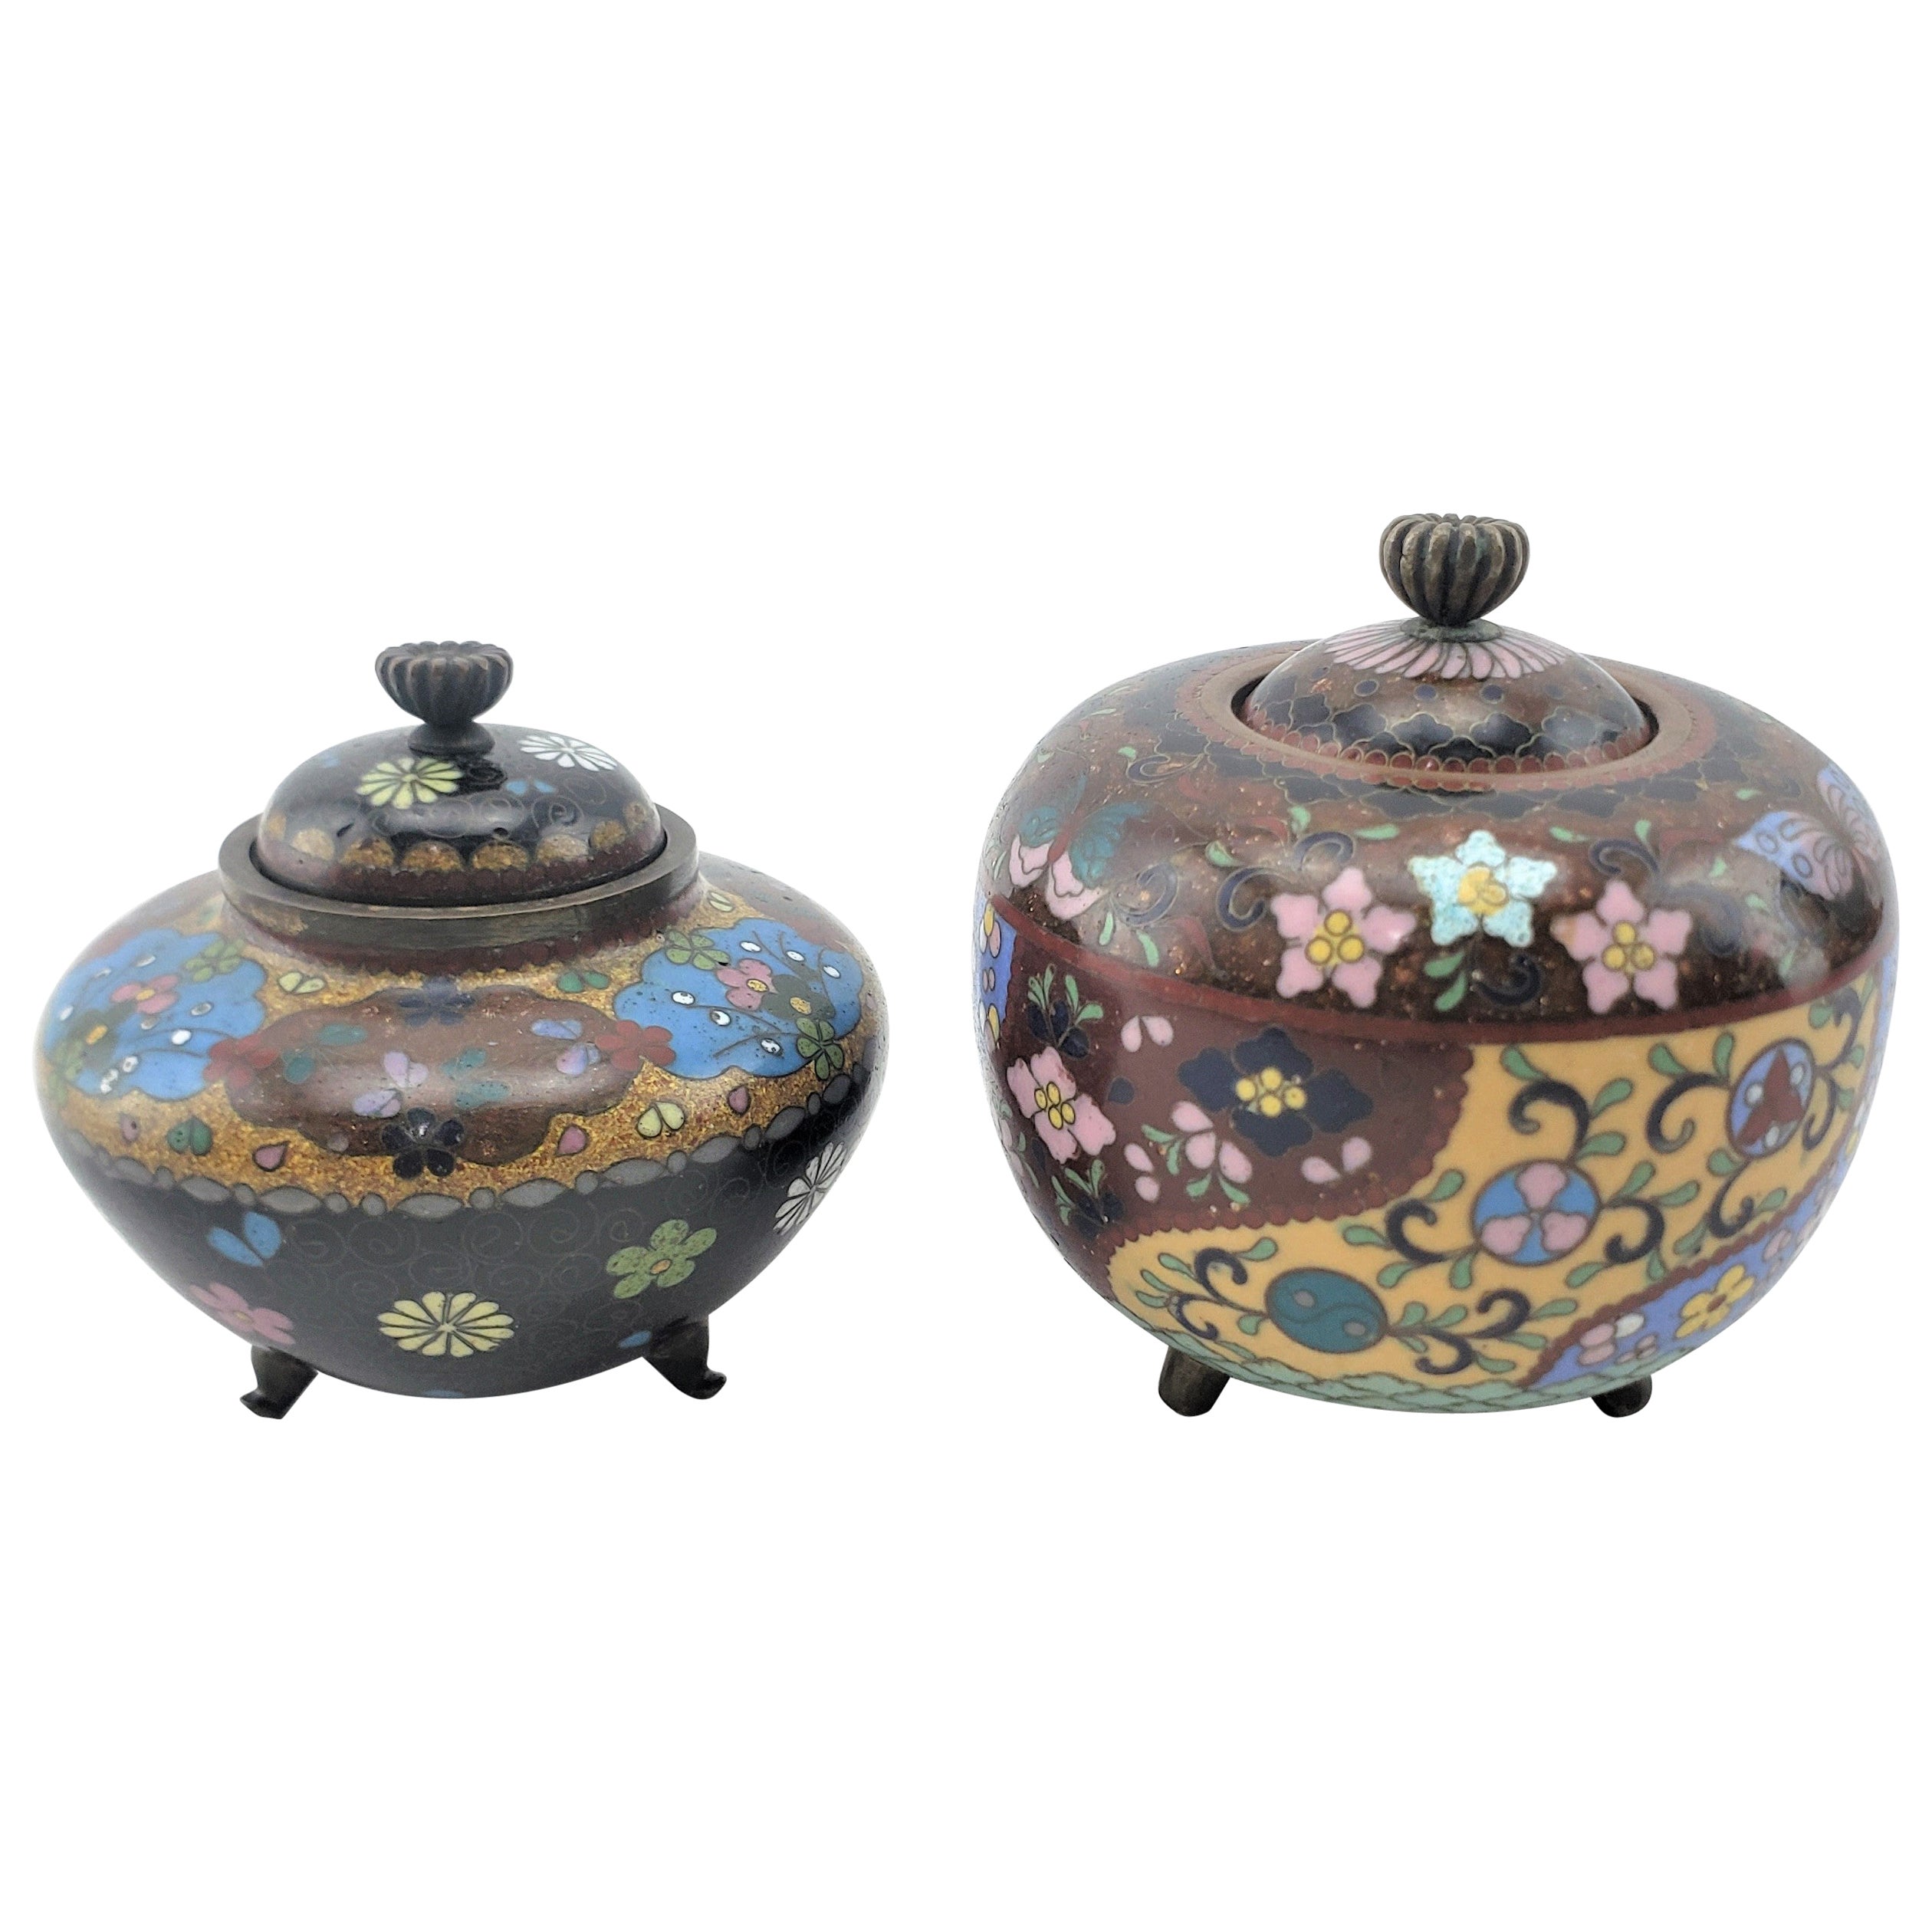 Pair of Antique Japanese Cloisonne Covered Jars with Floral Motif Decoration